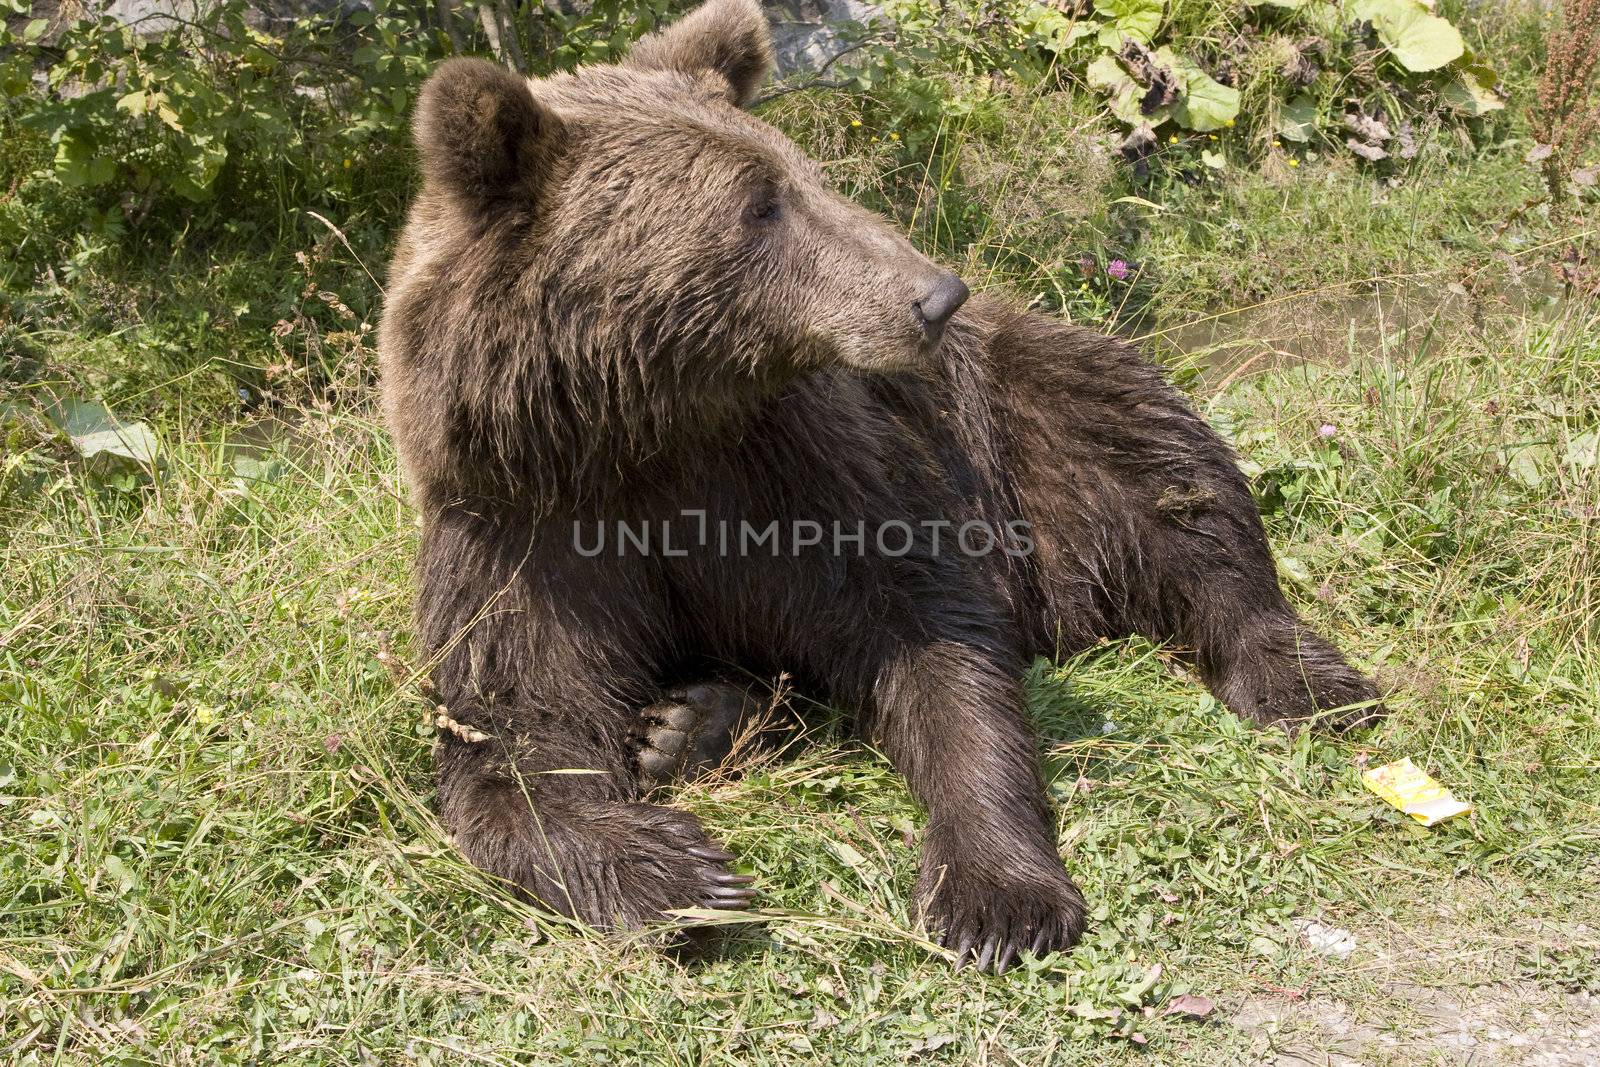 Wild Bear Cooling In Water by MihaiDancaescu